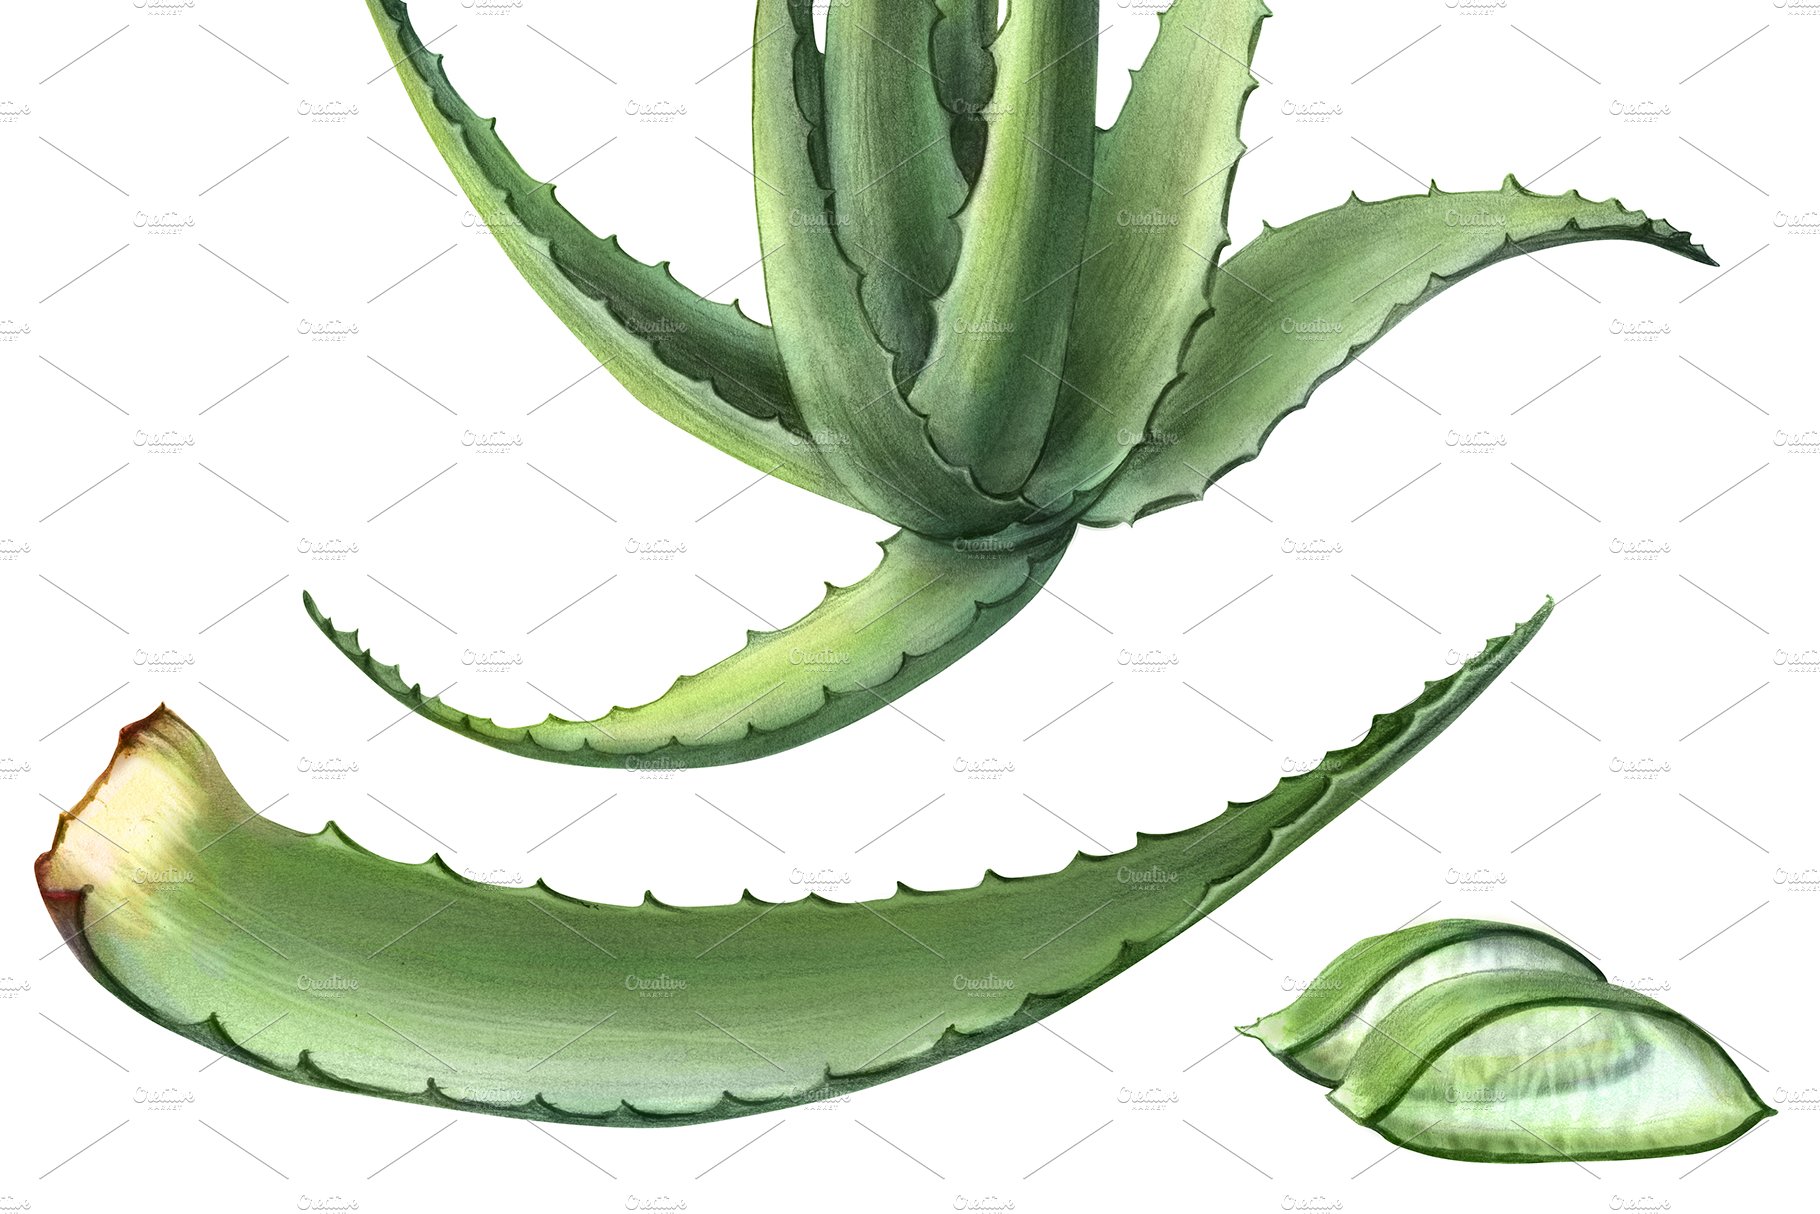 Drawing of an aloei plant with leaves.